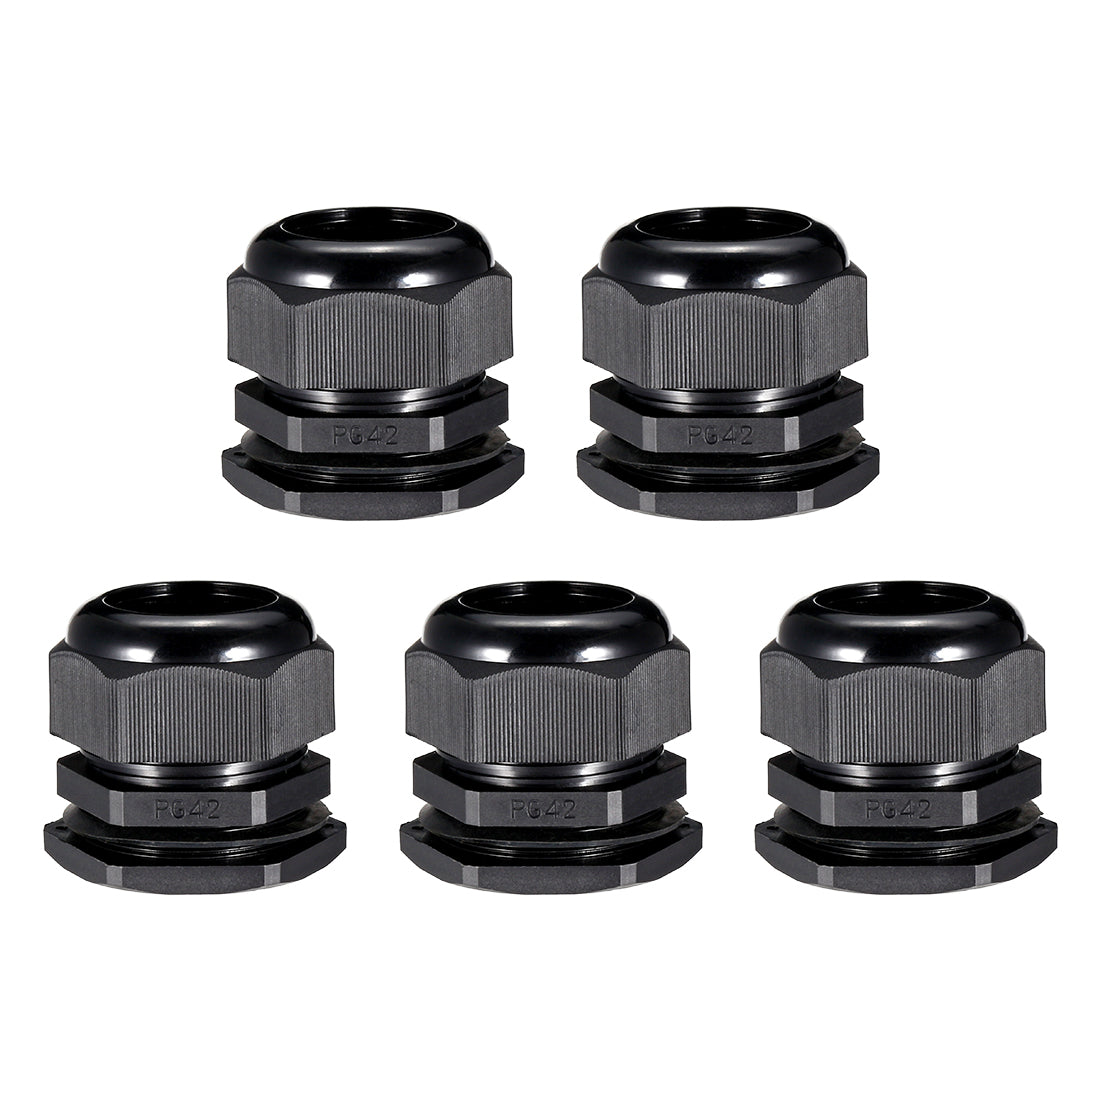 uxcell Uxcell 5Pcs PG42 Cable Gland Waterproof Plastic Joint Adjustable Locknut Black for 32mm-38mm Dia Cable Wire